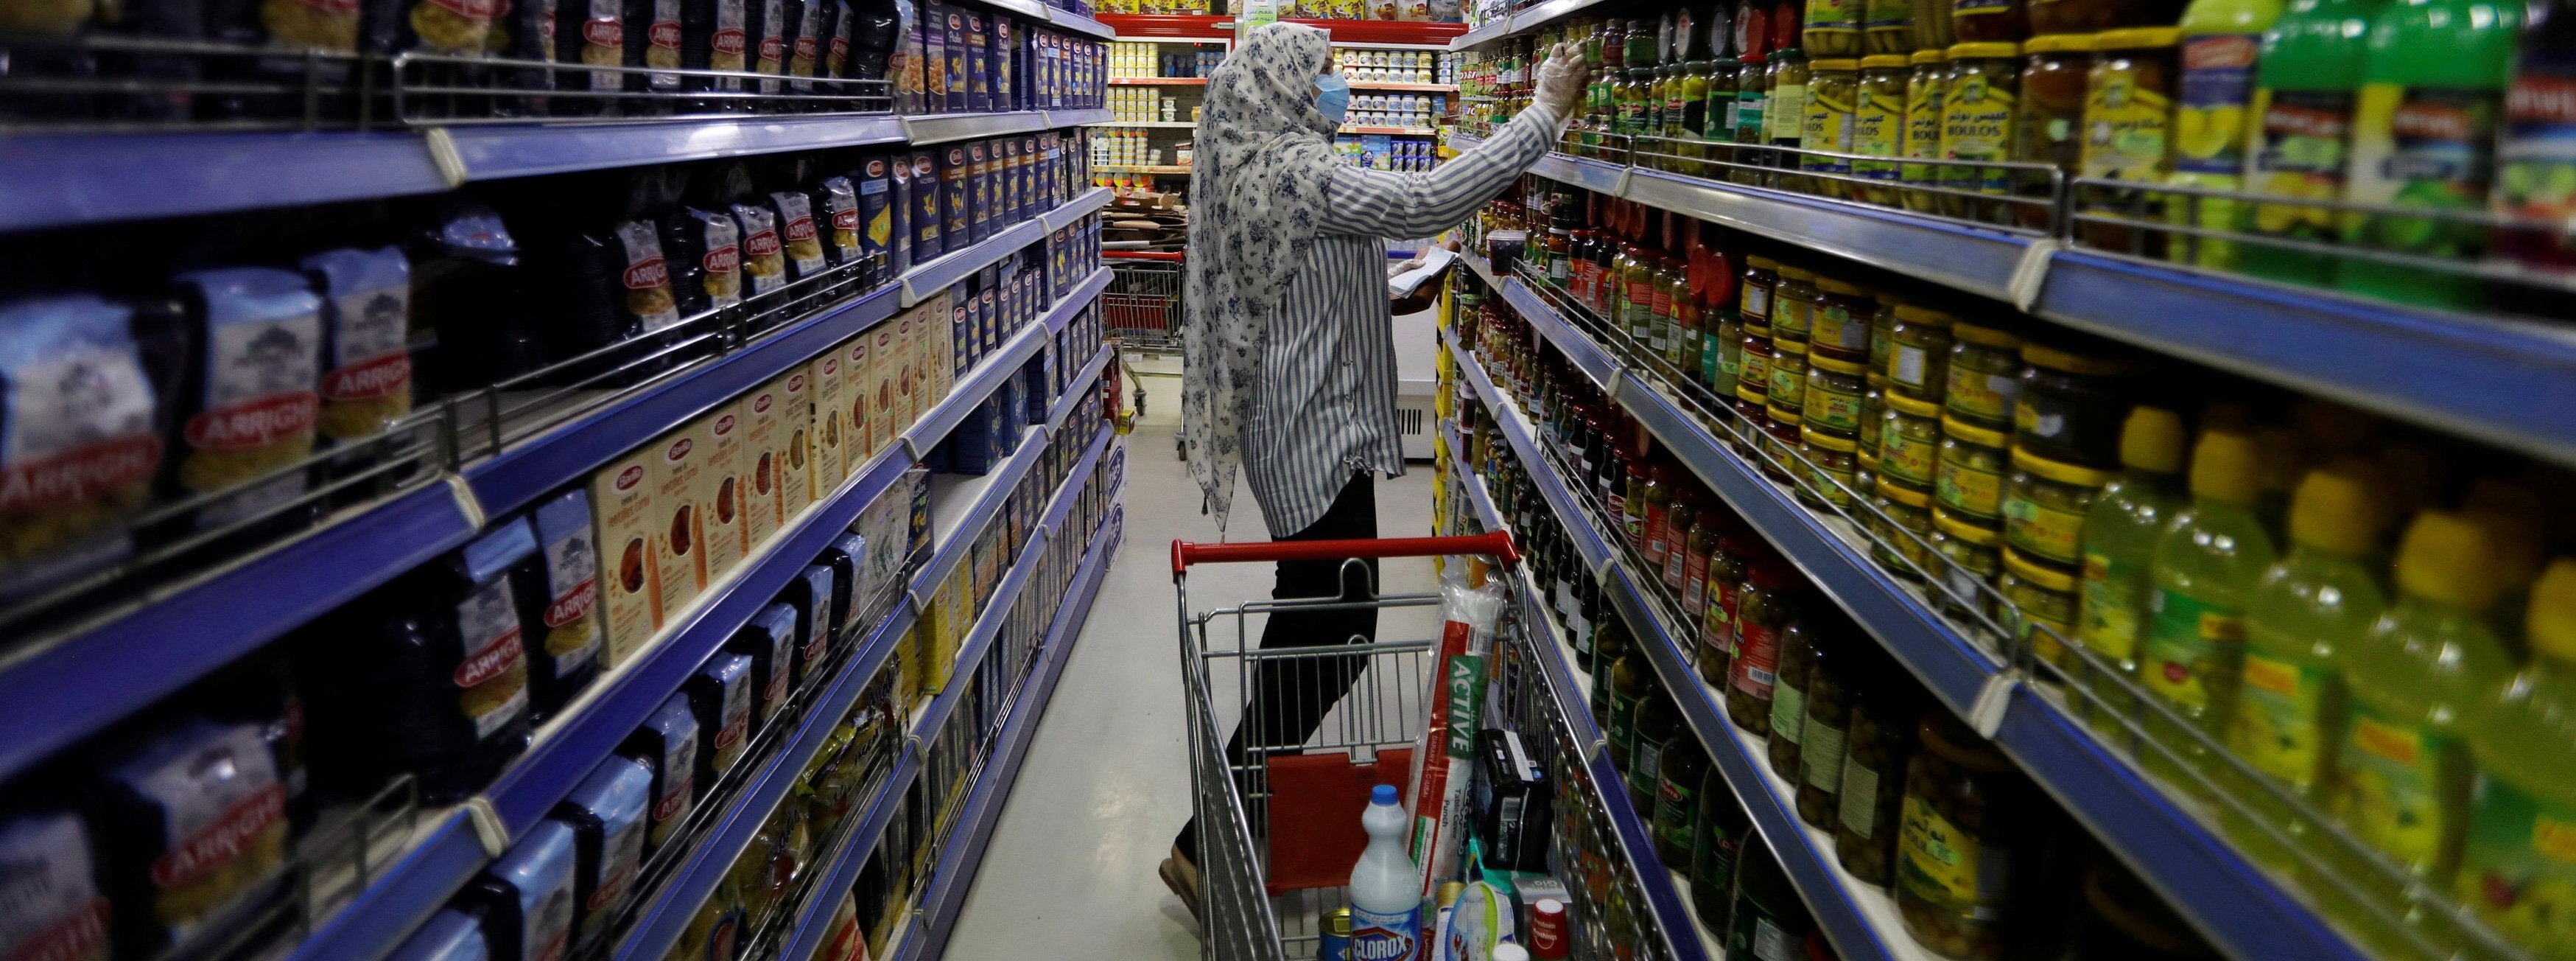 A woman wears a protective face mask and gloves, as she shops at a supermarket before curfew, following the outbreak of coronavirus, in Baghdad, Iraq March 17, 2020. REUTERS/Khalid al-Mousily